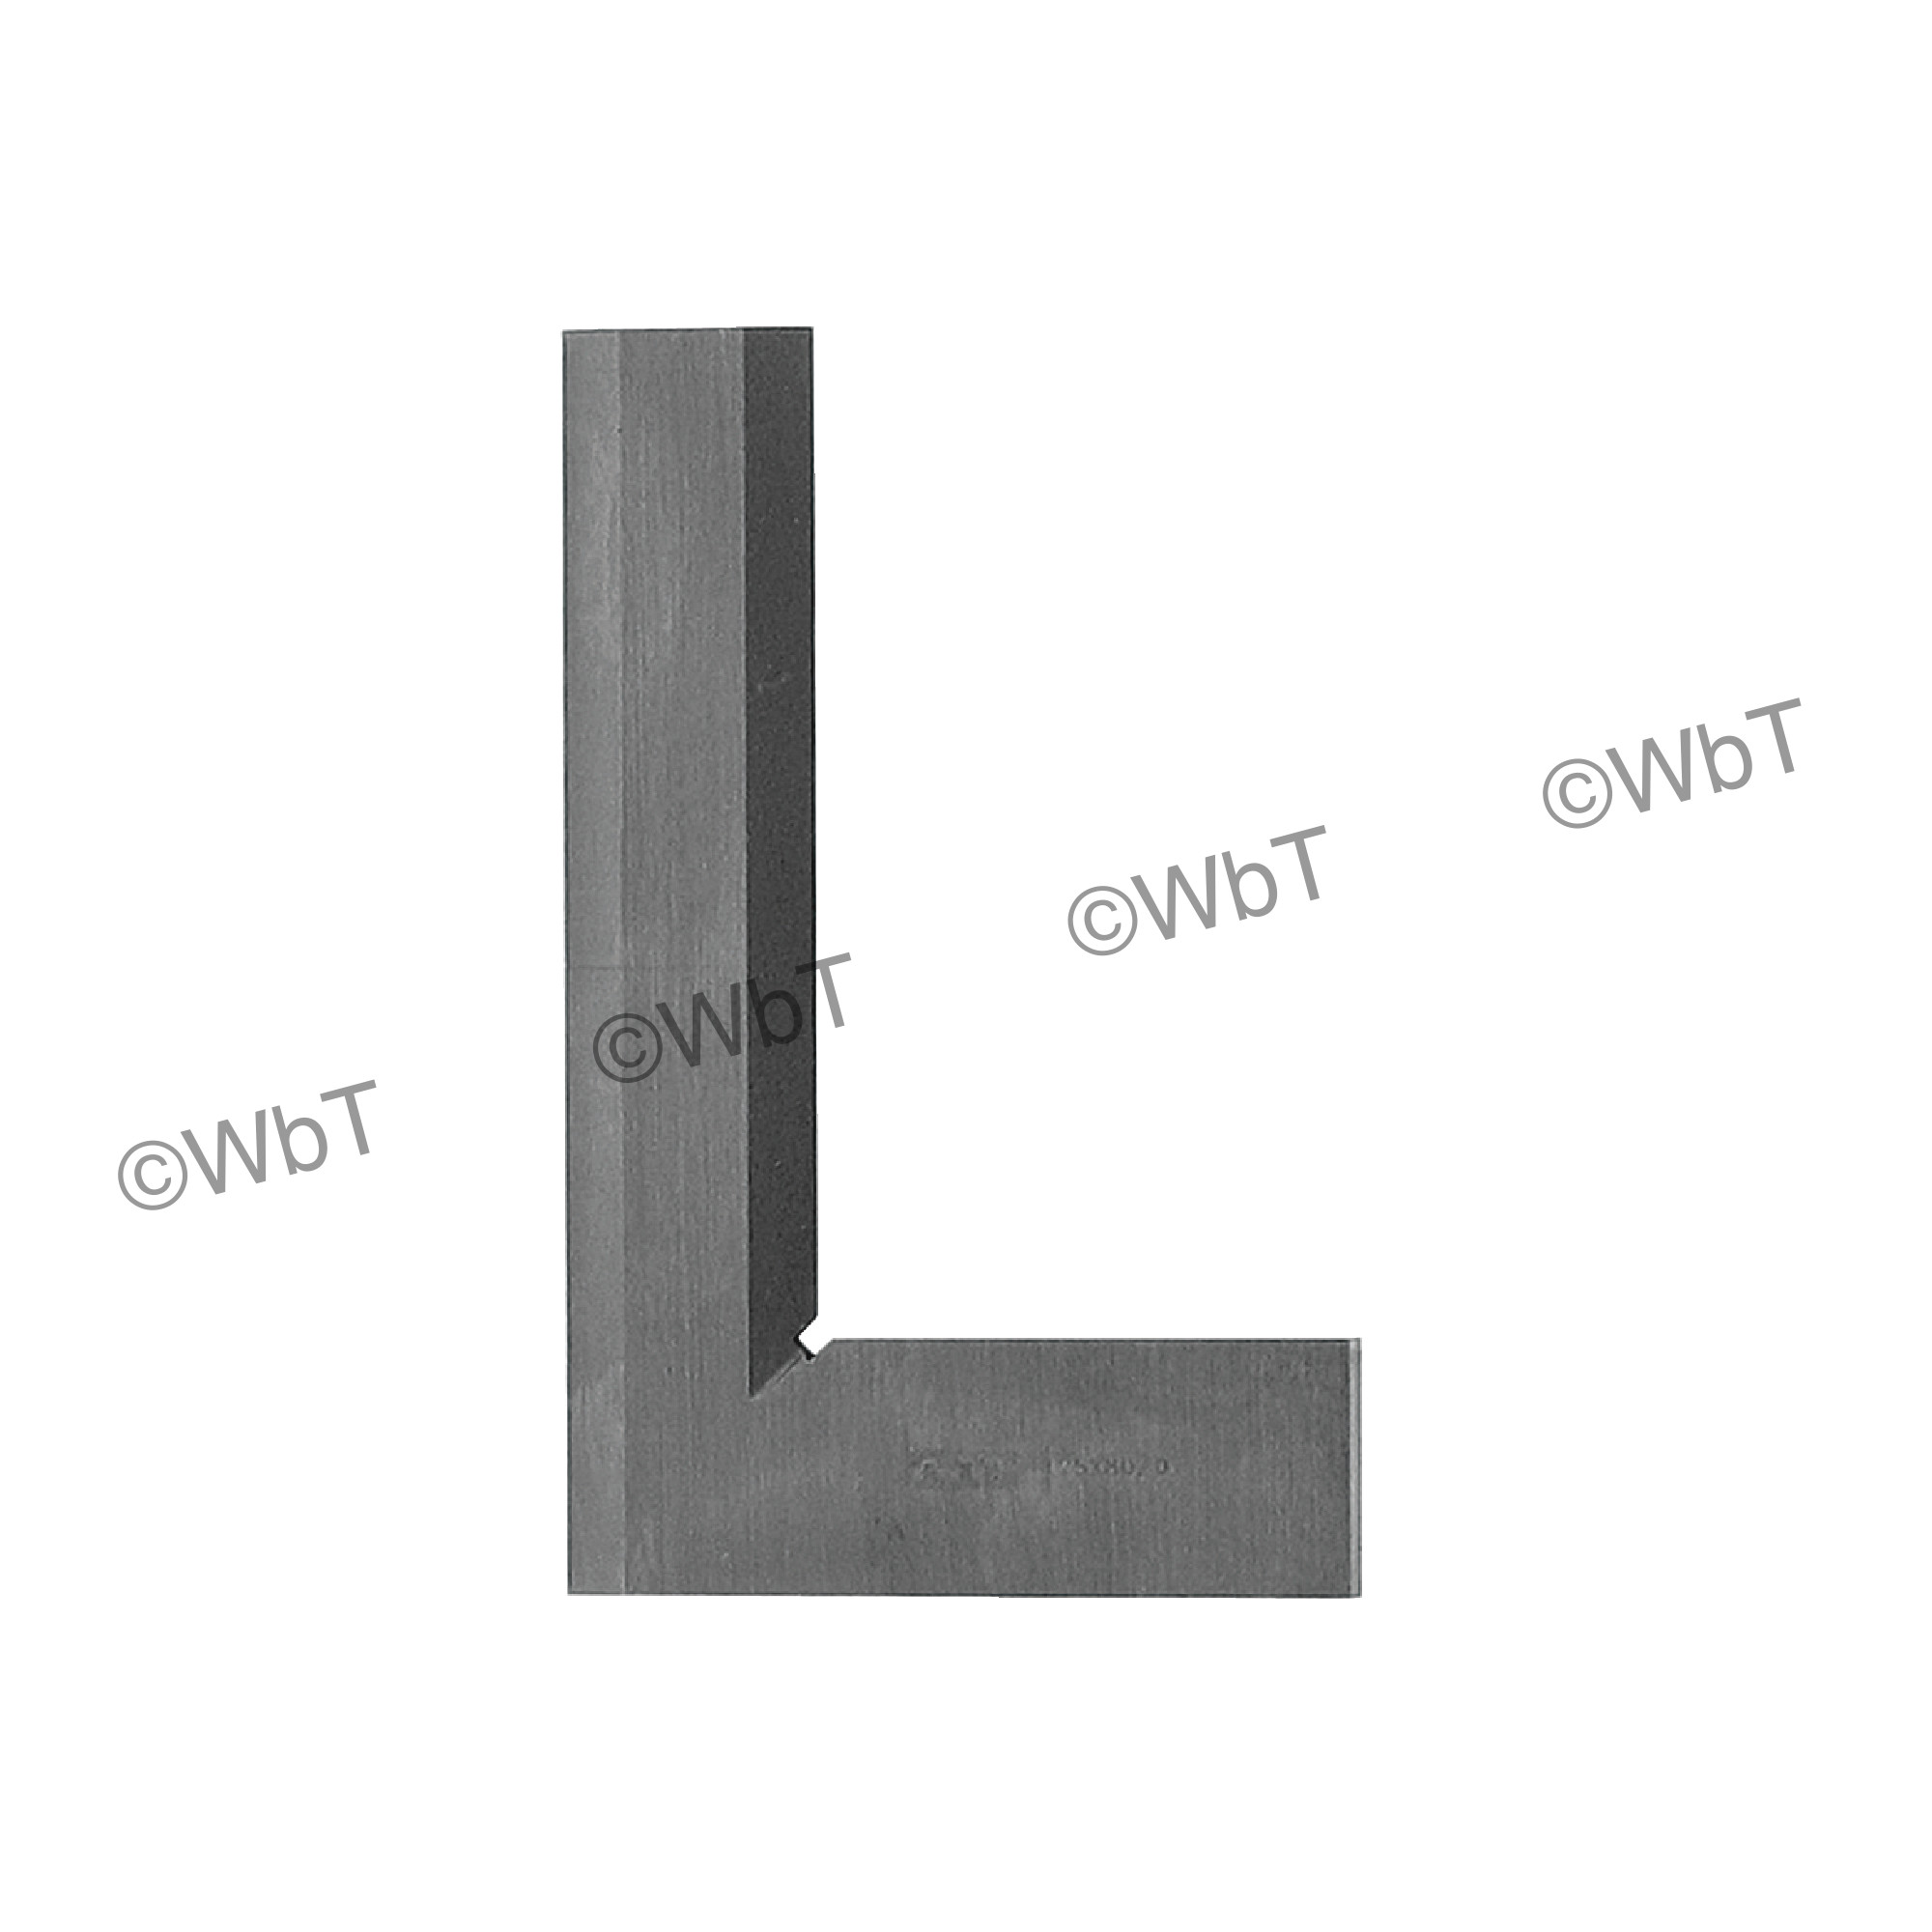 Hardened Precision Steel Square With Beveled Edges